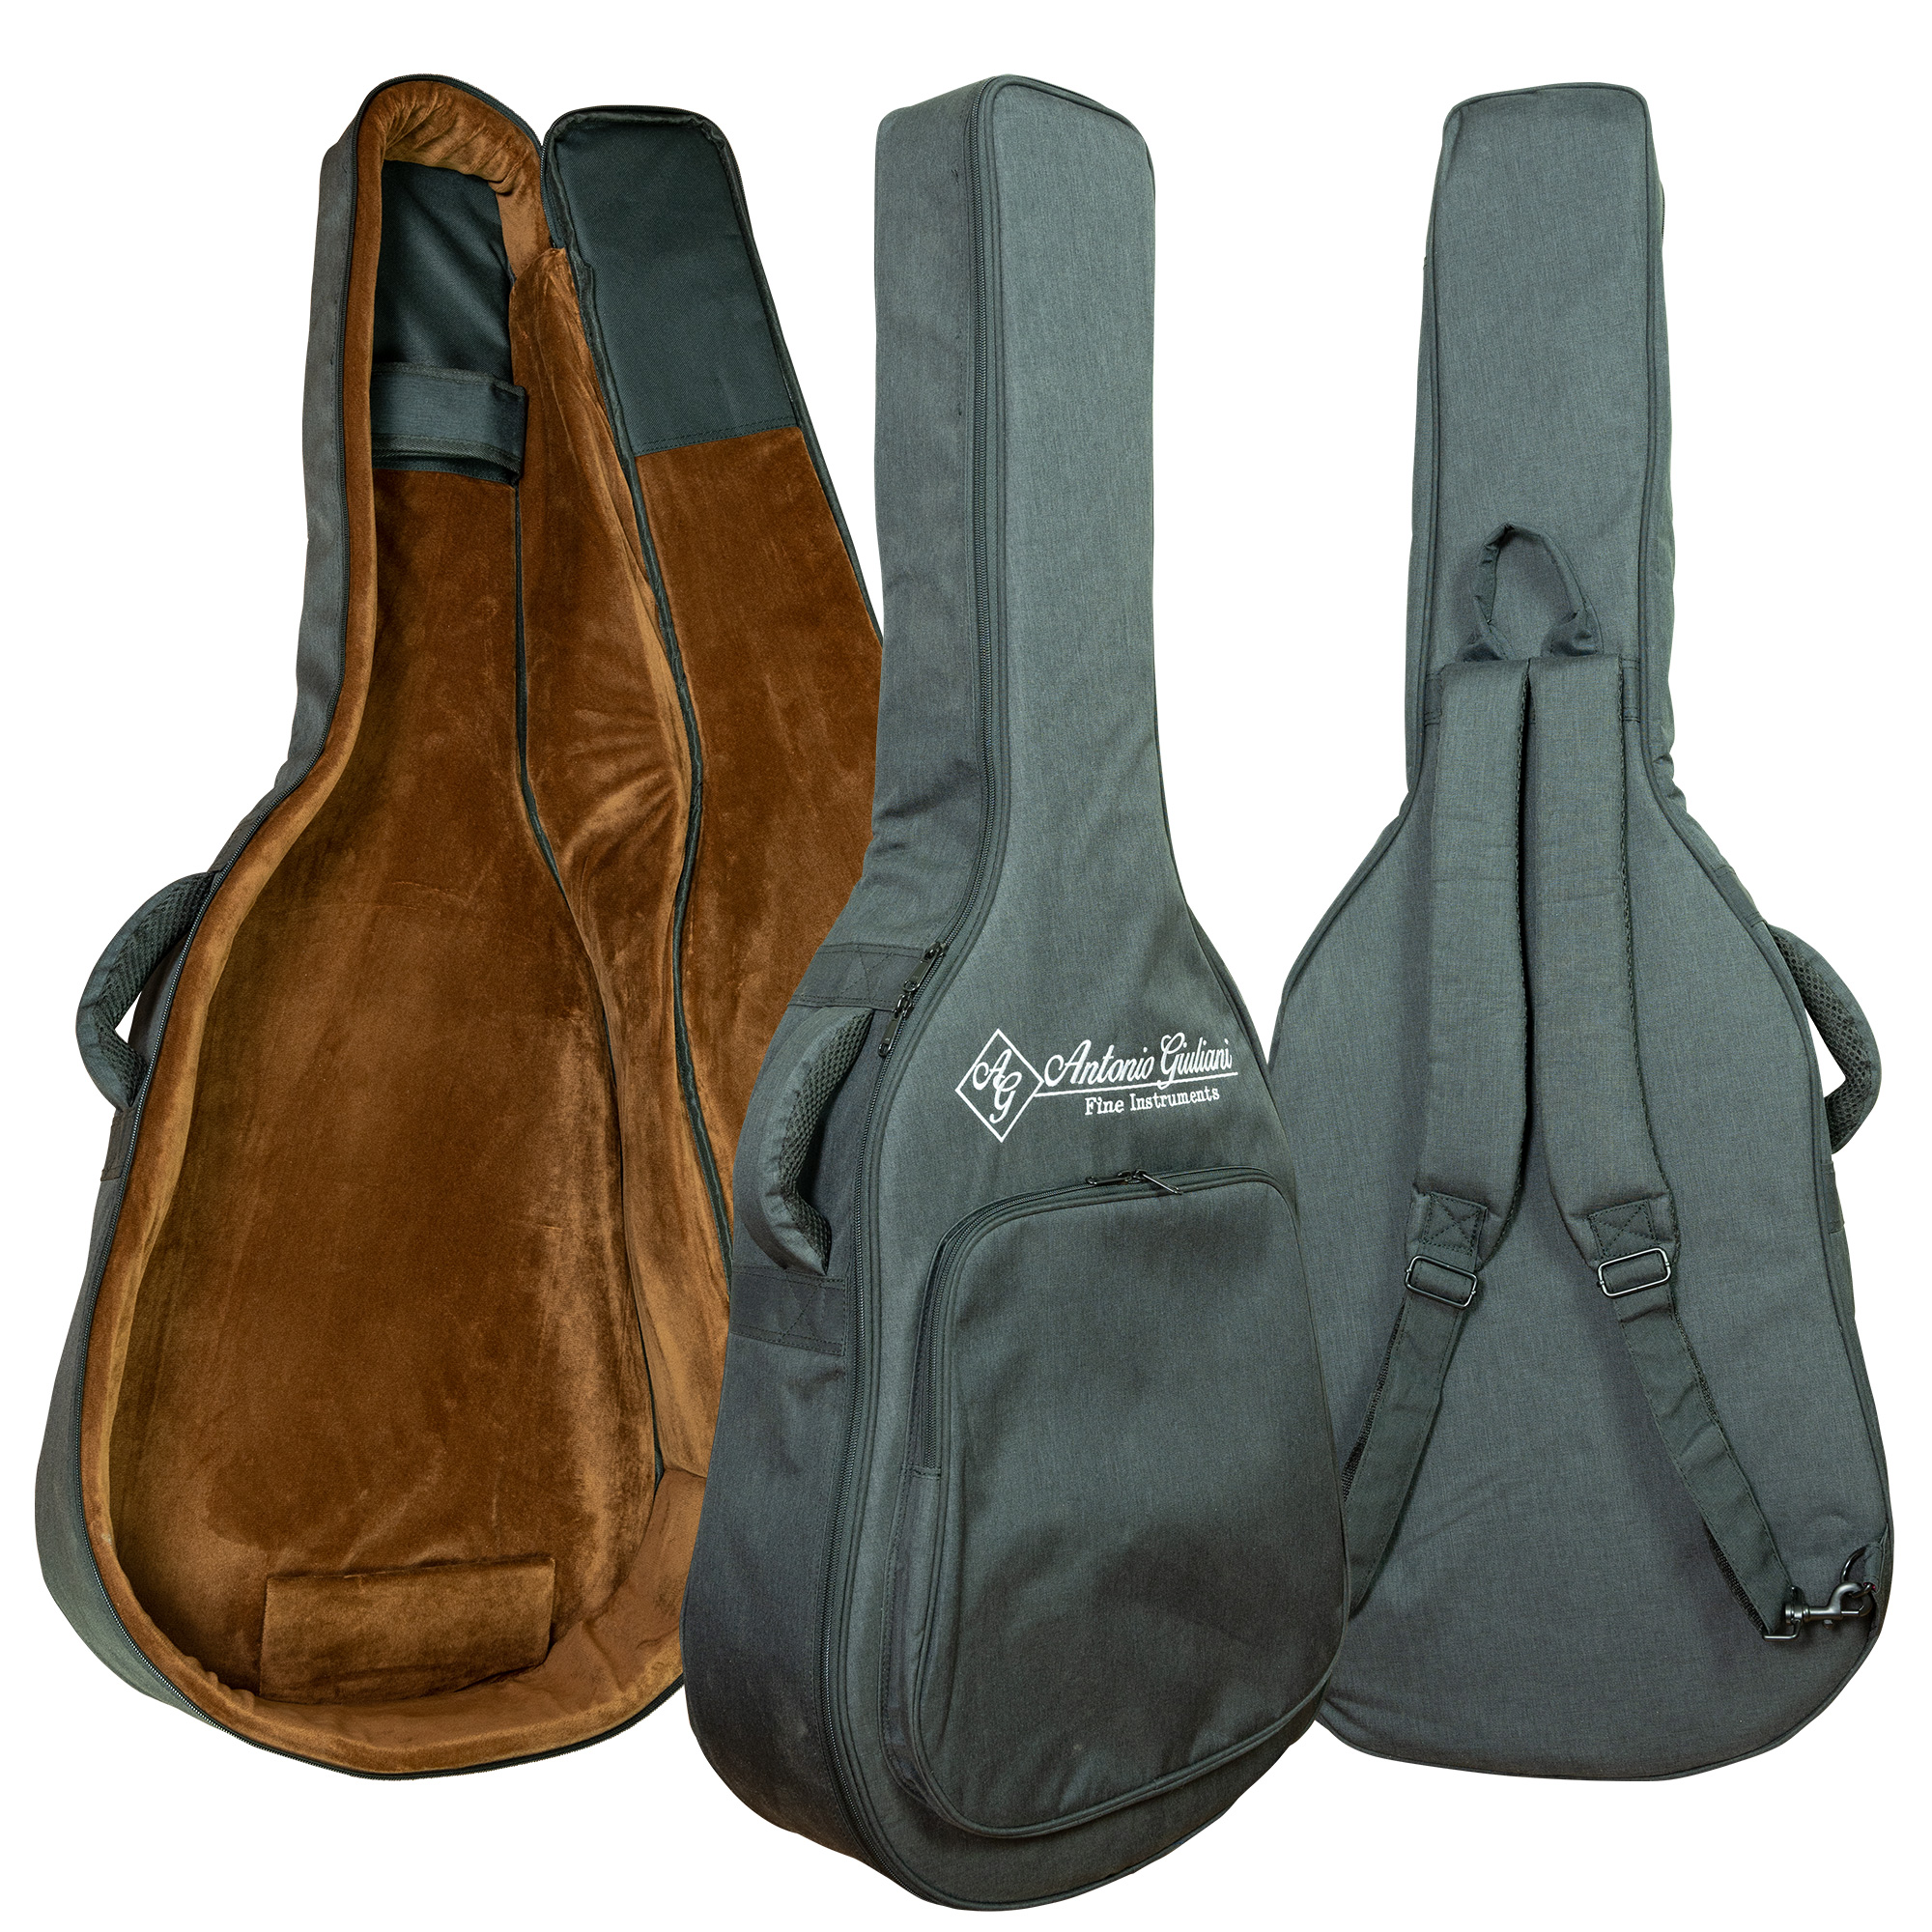 26mm-Padded Premium Guitar Gig Bag in action